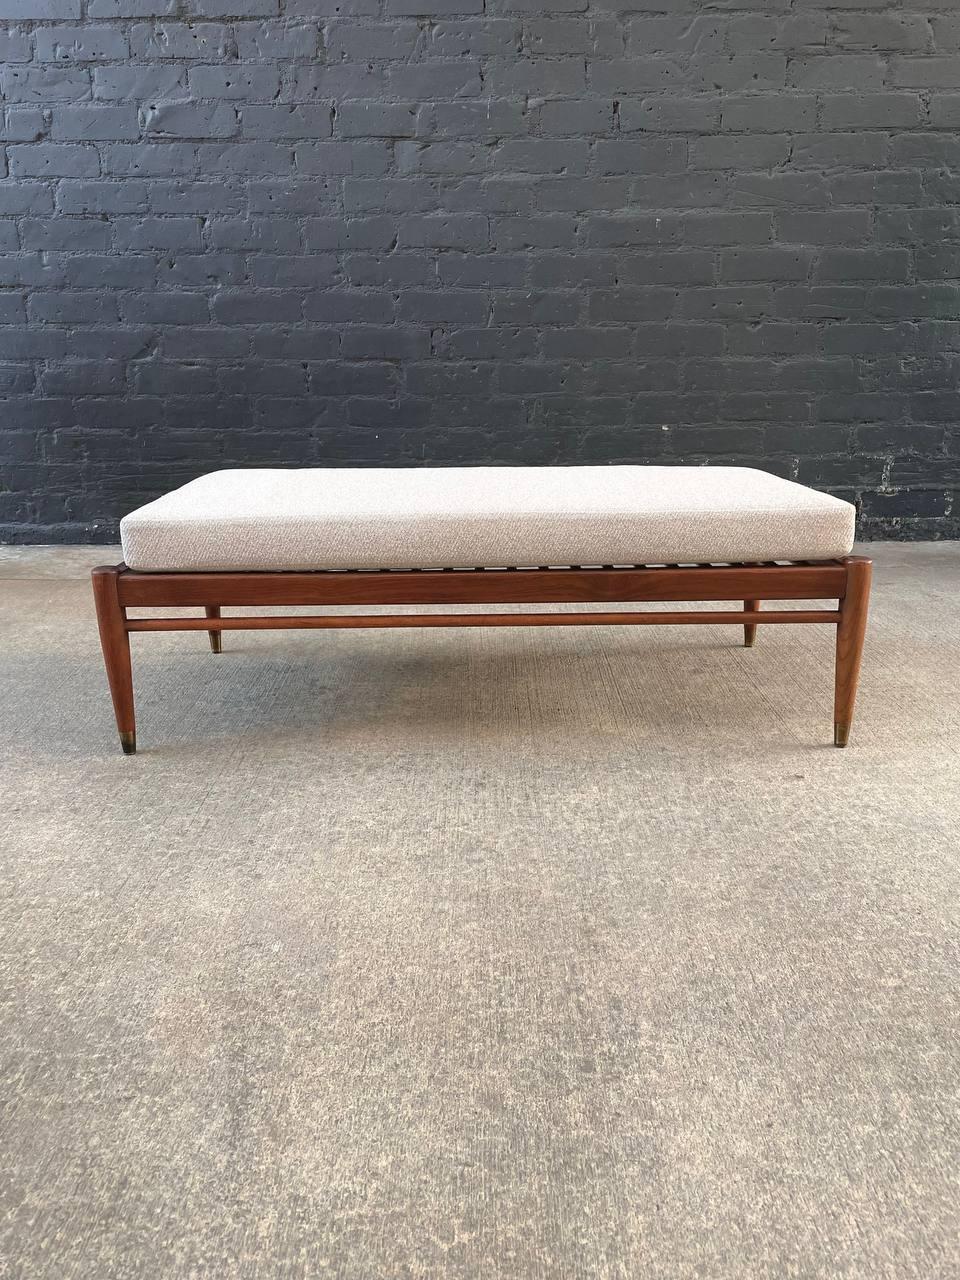 Mid-20th Century Newly Reupholstered - Mid-Century Modern Daybed Sofa by Folke Olhsson for Dux For Sale